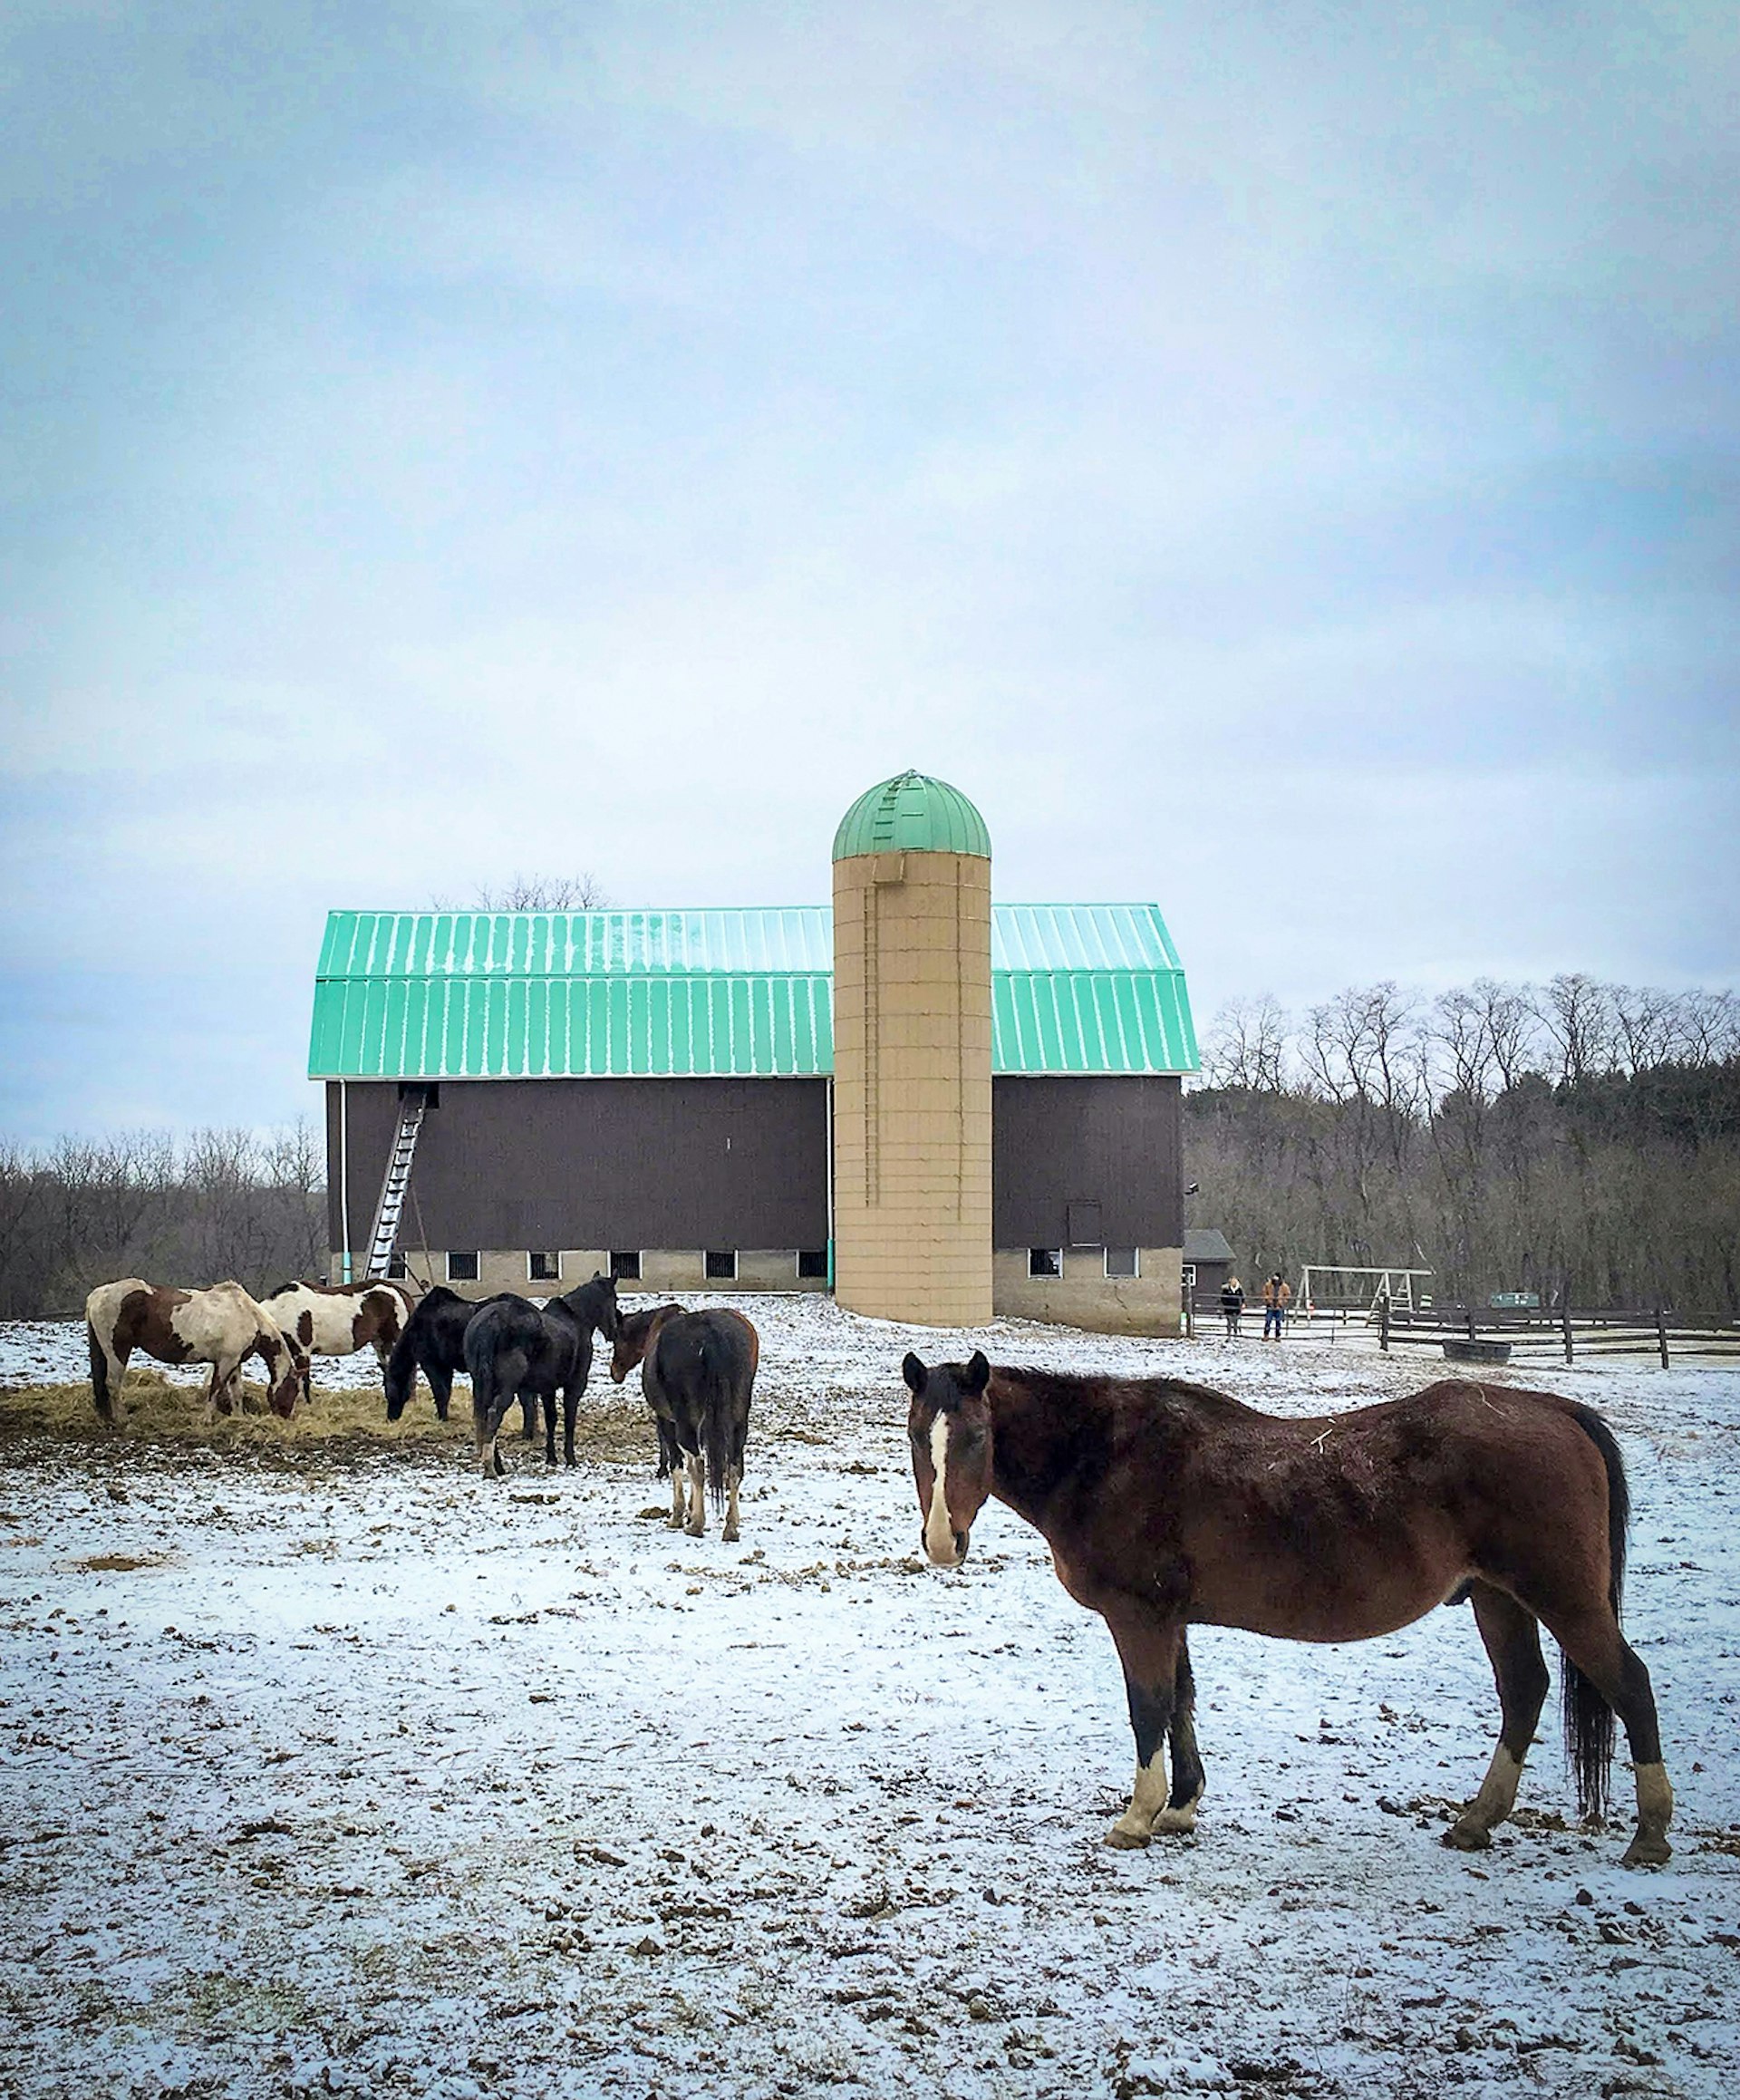 Horses stand in the snow in front of a barn with a teal roof at Geneva Lake, Wisconsin